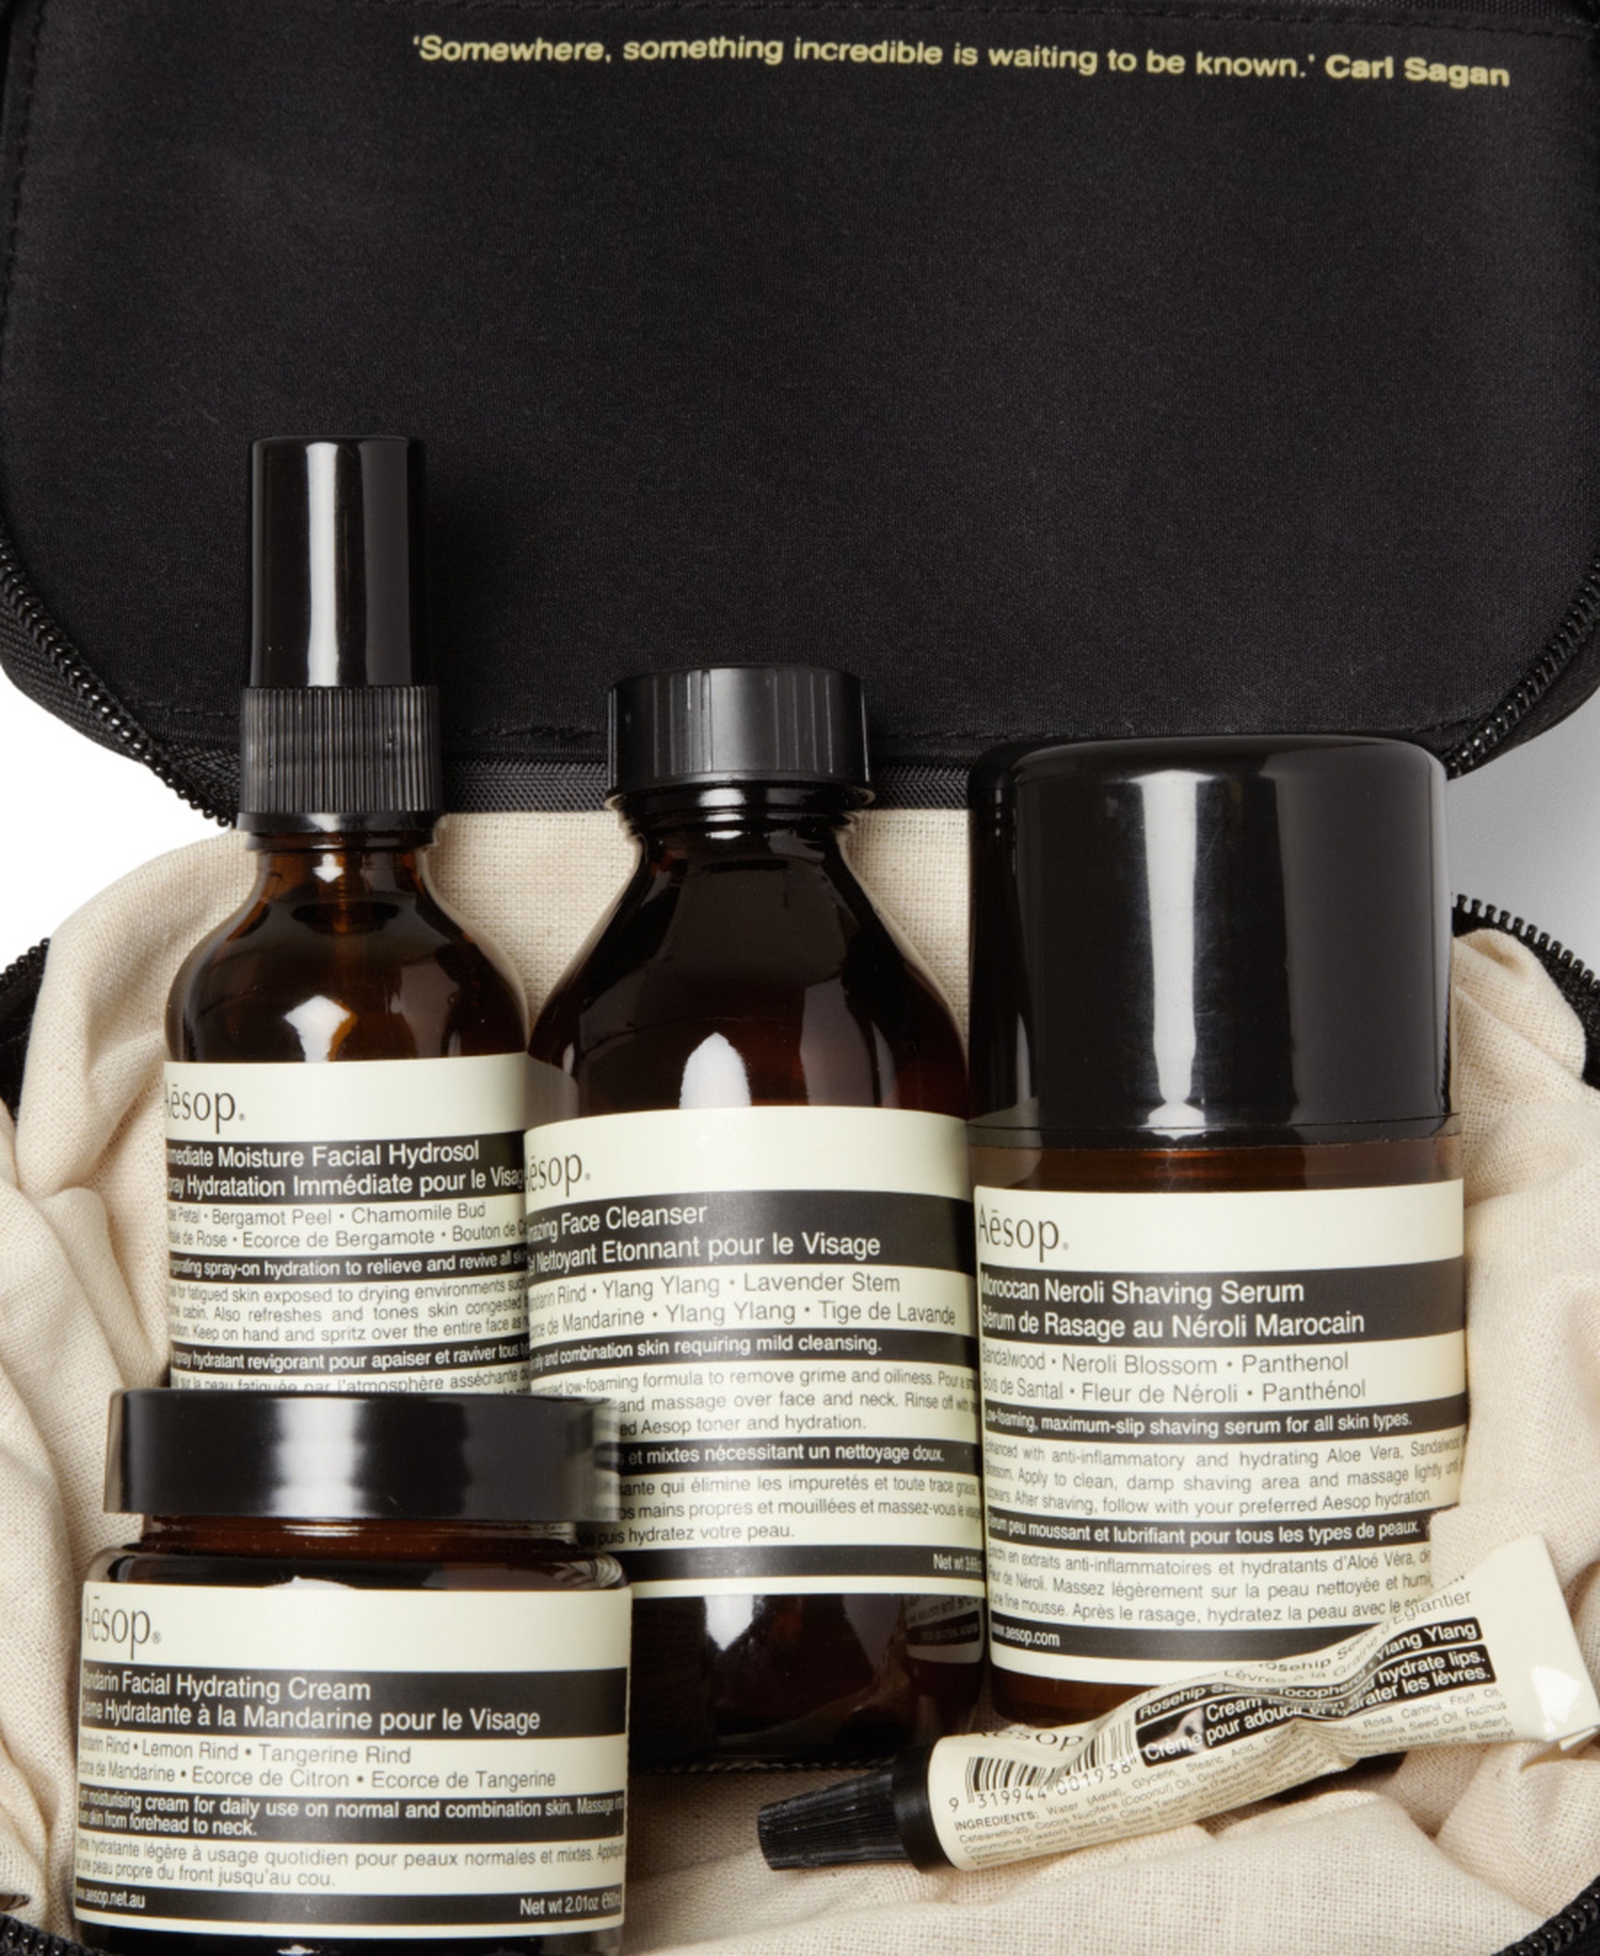 MR PORTER teams up with skincare brand Aesop